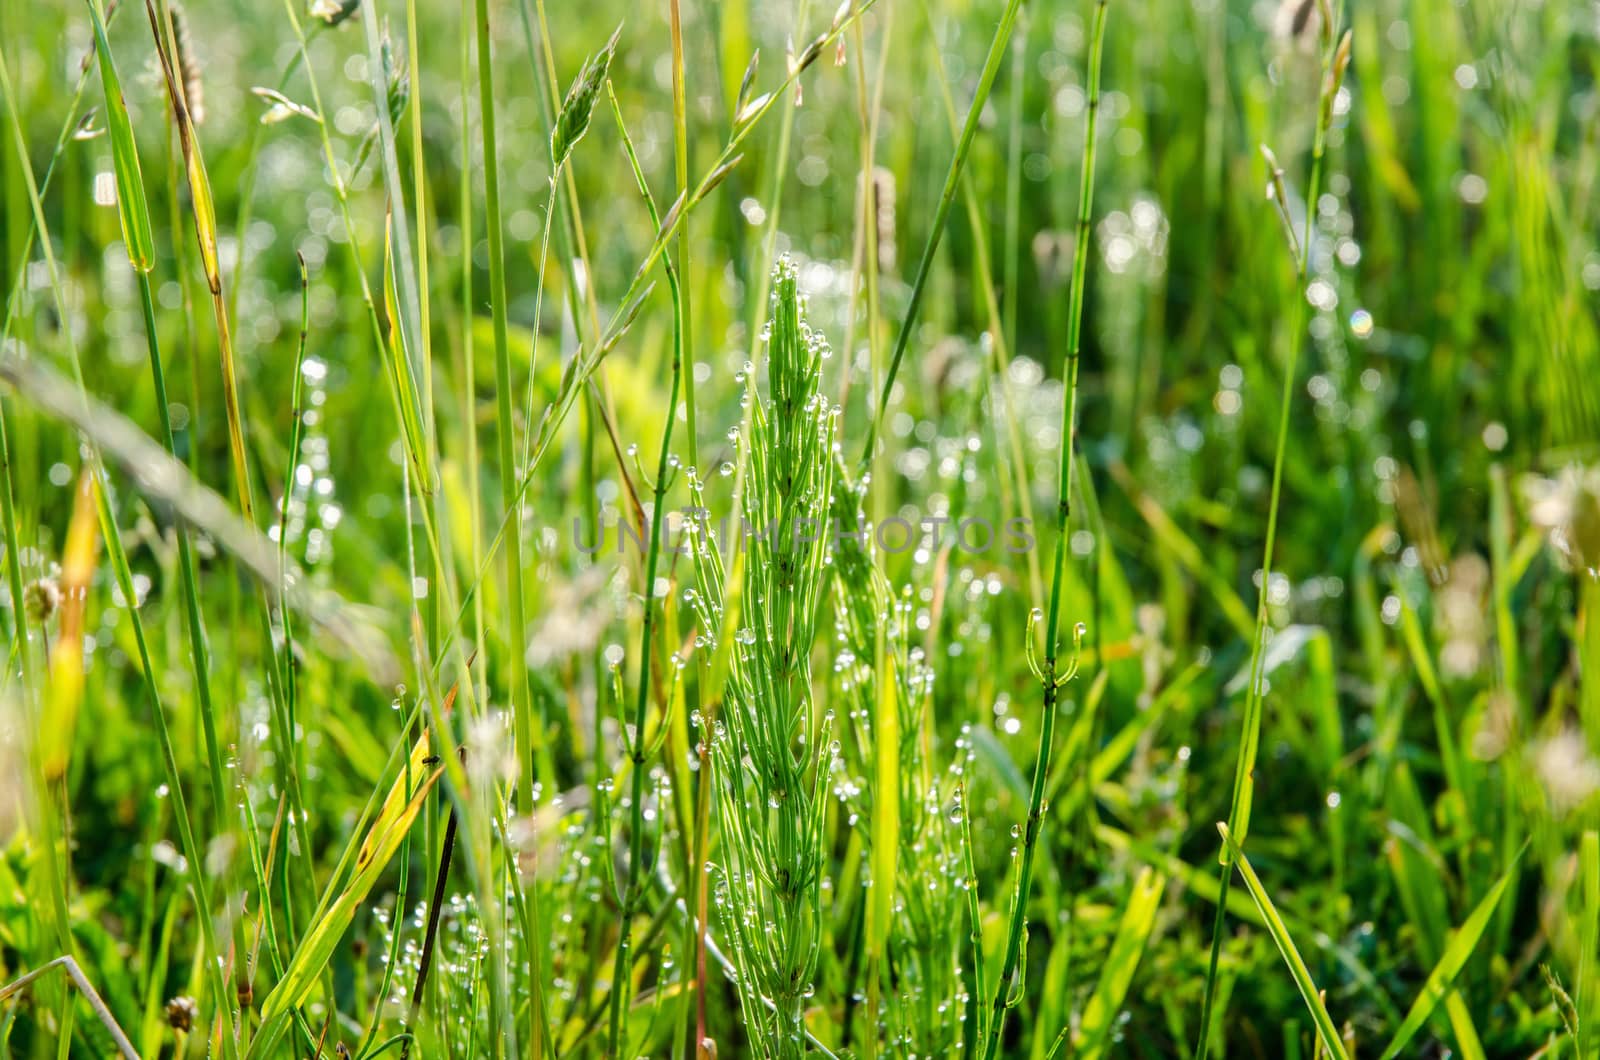 Meadow grass with dew droplets